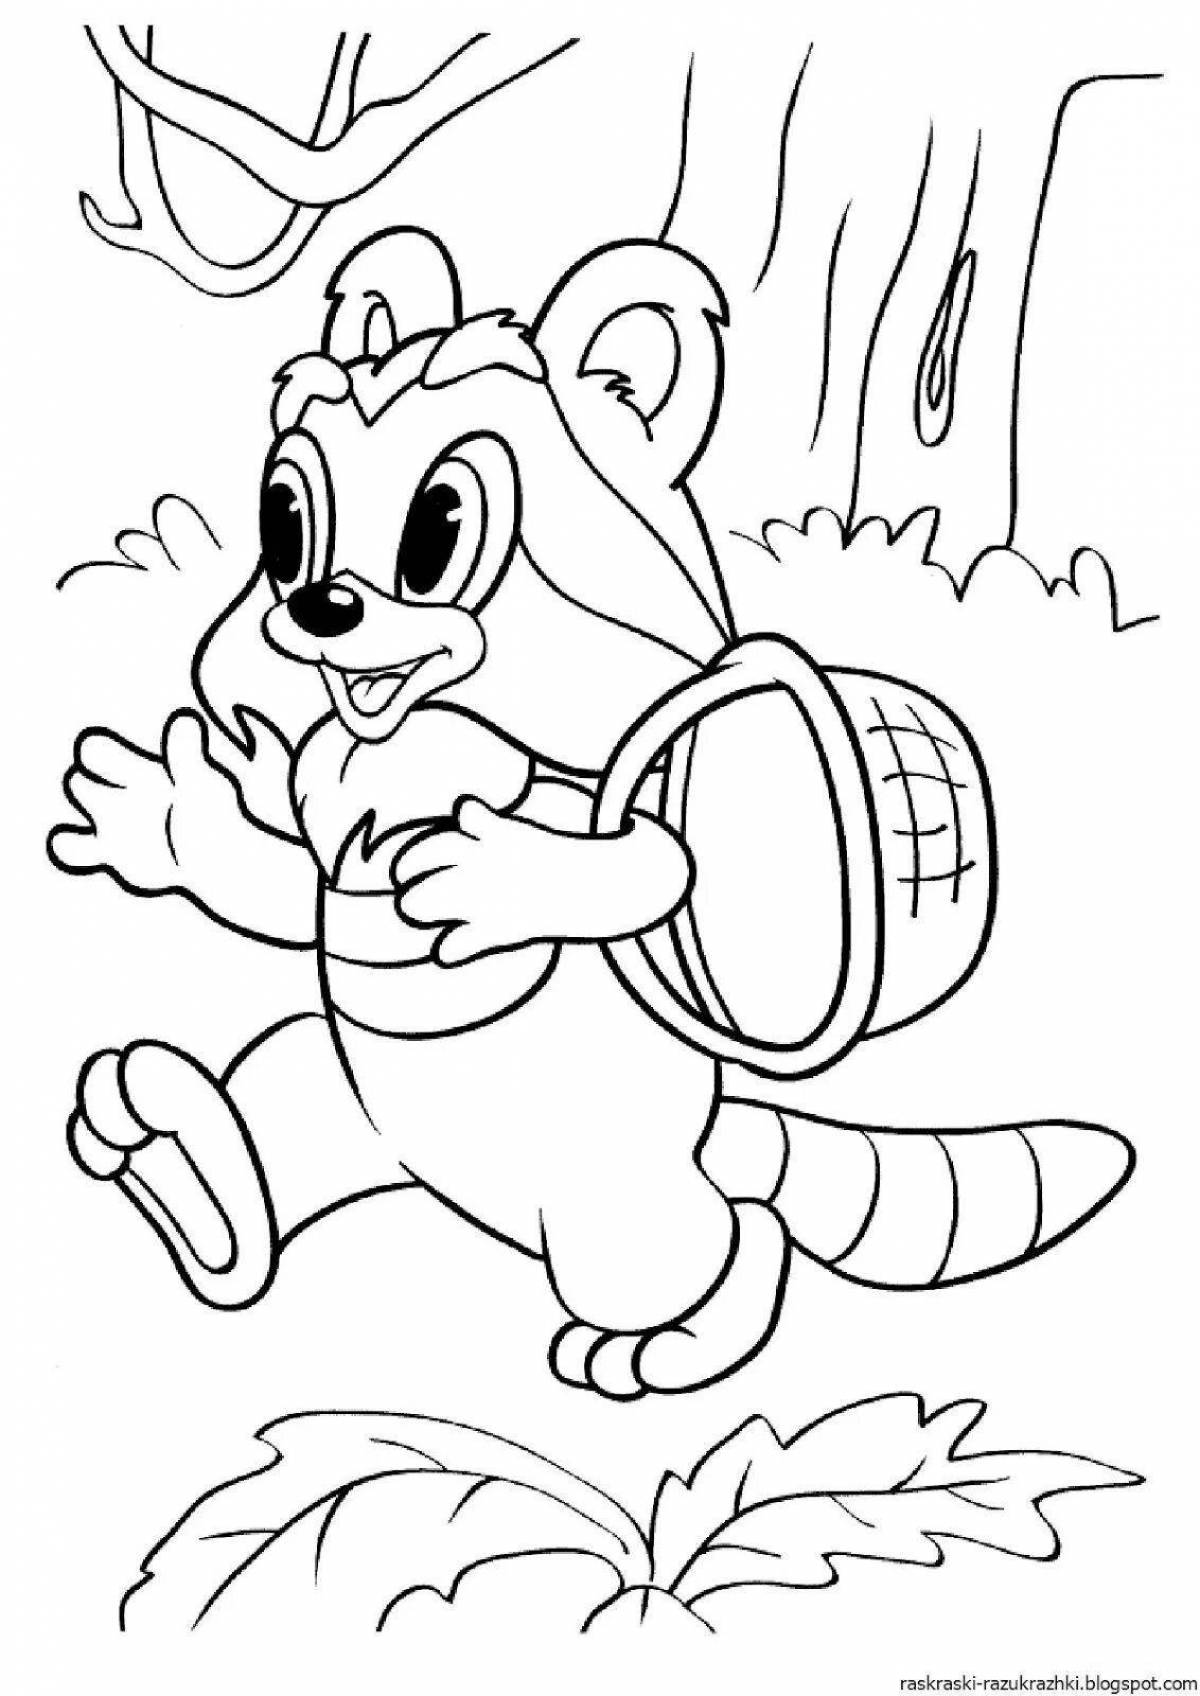 Fun cartoon coloring book for 4-5 year olds